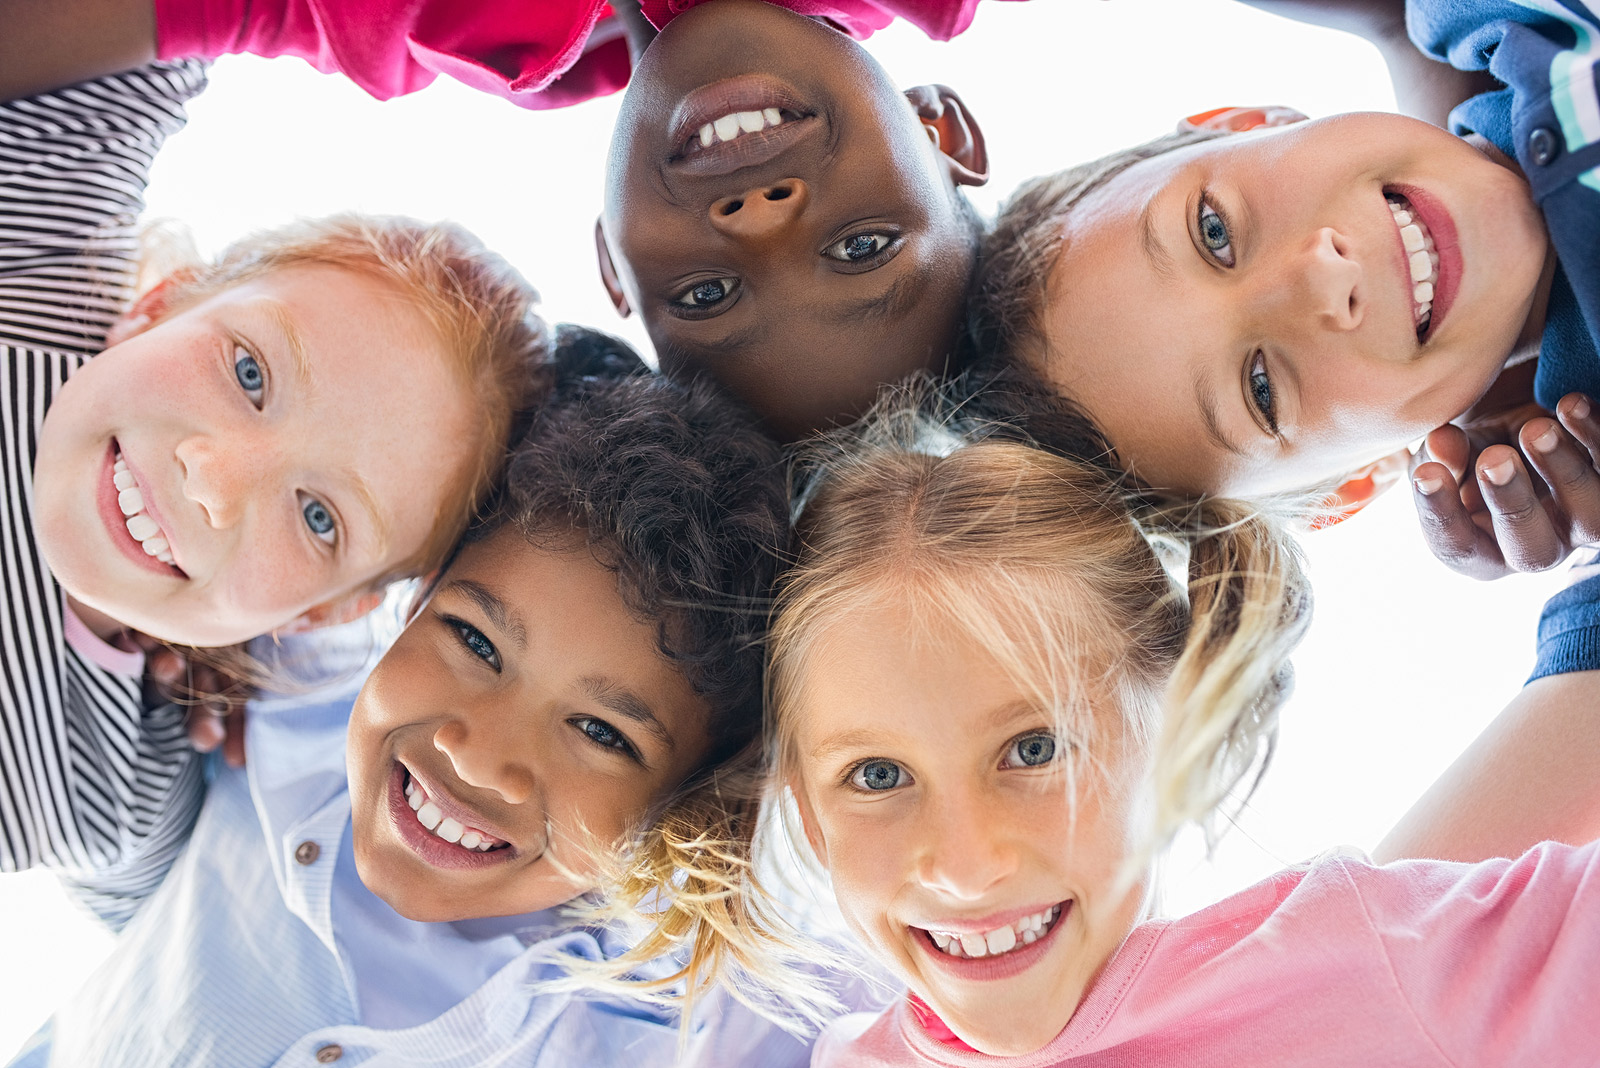 The image shows a group of smiling, happy children huddled together in a close circle, looking down at the camera. There are five children of various ethnicities, including both boys and girls, suggesting diversity and inclusivity. The children appear to be young, possibly in their elementary school years. They are wearing casual, colorful clothing and have bright, cheerful expressions on their faces. The image is shot from a low angle, giving the viewer the perspective of looking up at the children's faces as they peer down into the camera with joy and enthusiasm. The composition creates a sense of unity, friendship, and positive energy among the group of children.